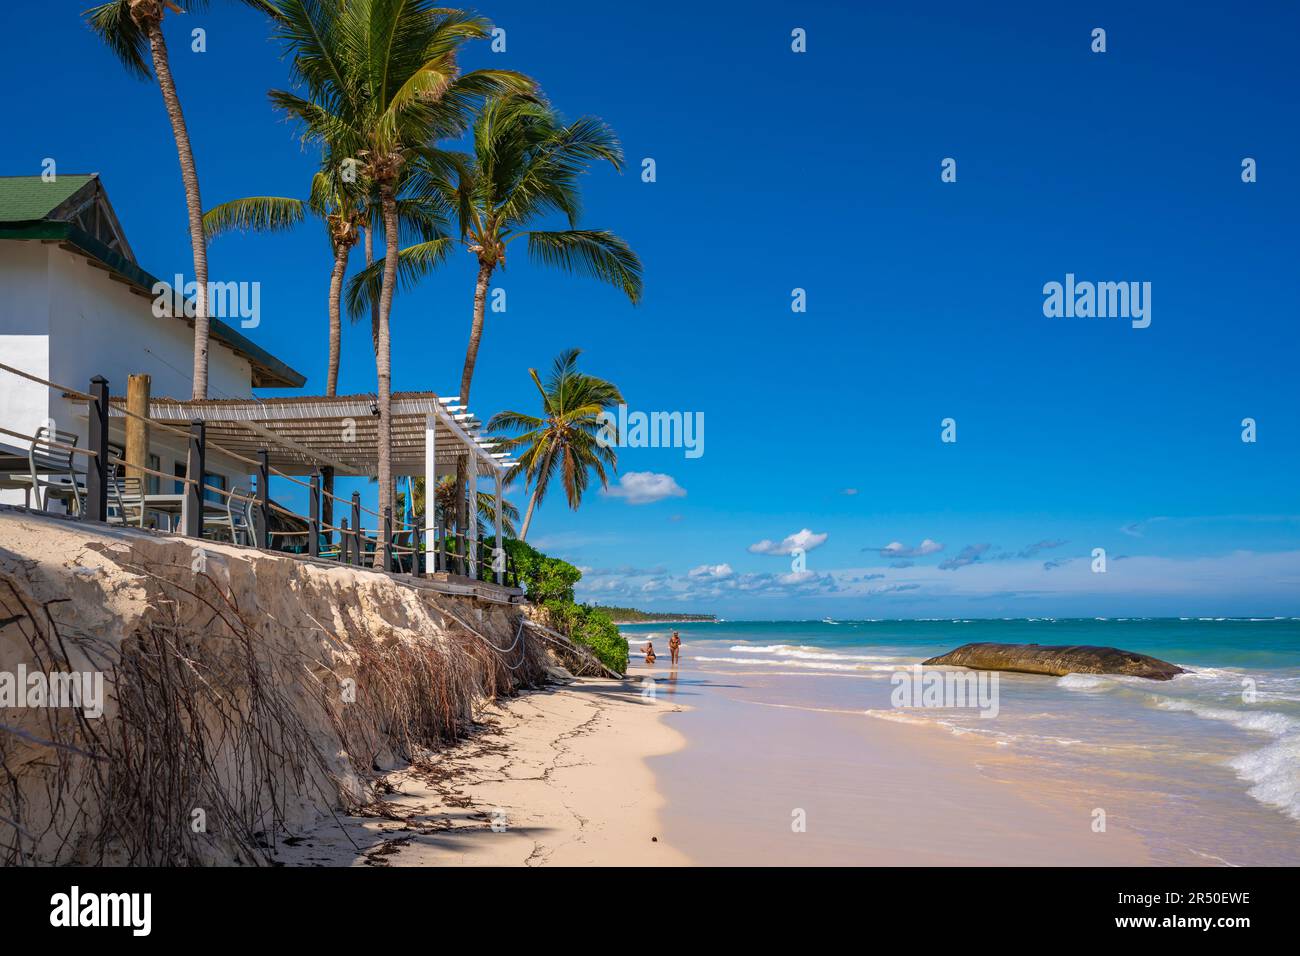 View of palm trees and cafe at Bavaro Beach, Punta Cana, Dominican Republic, West Indies, Caribbean, Central America Stock Photo